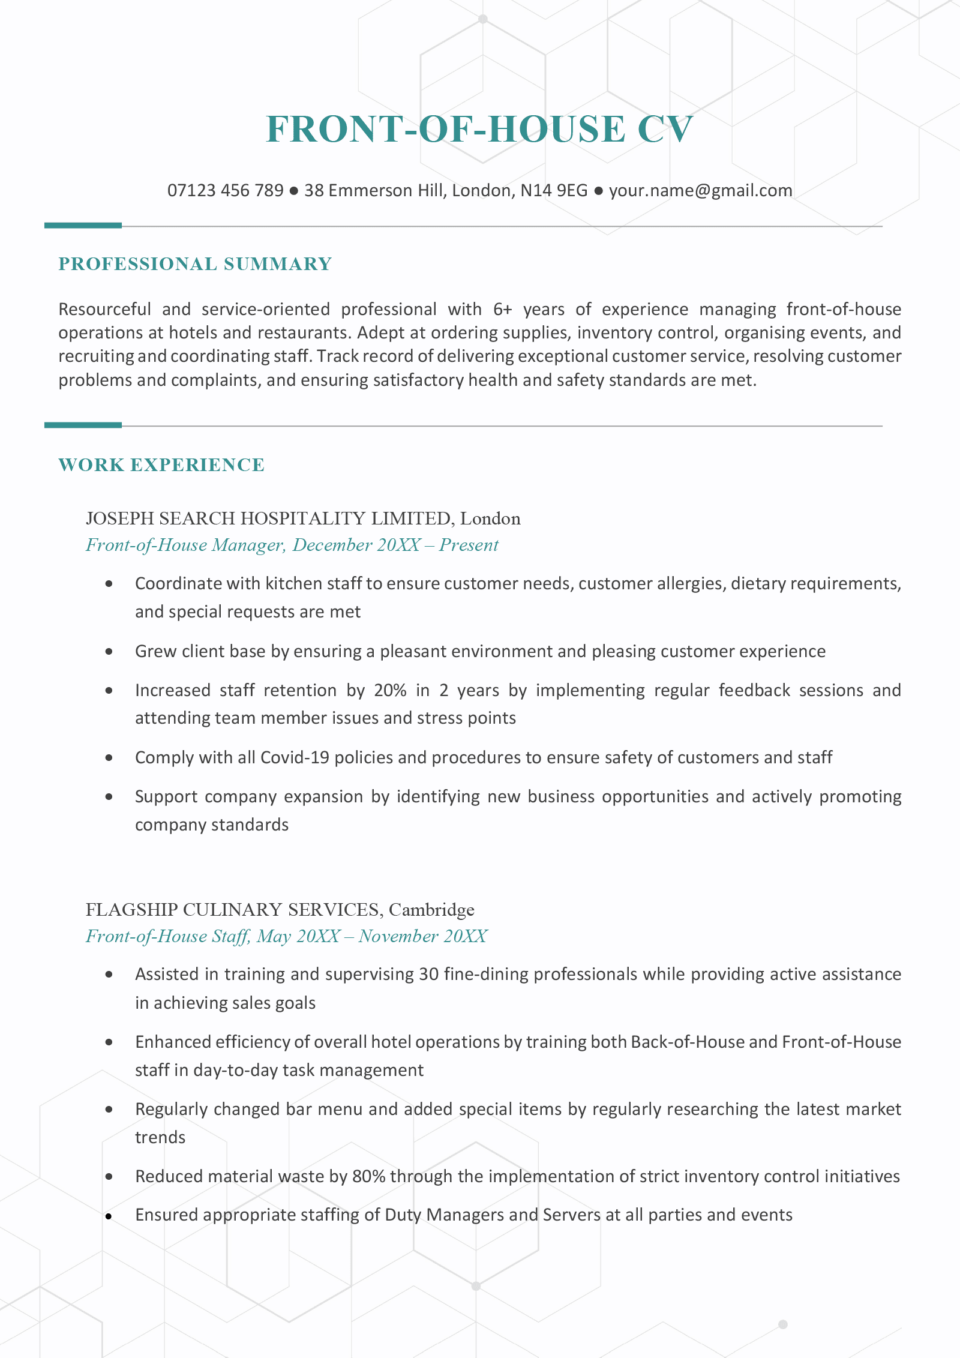 A front-of-house CV example with blue header text and two work experience entries outlining the applicant's experience working in the hospitality industry.